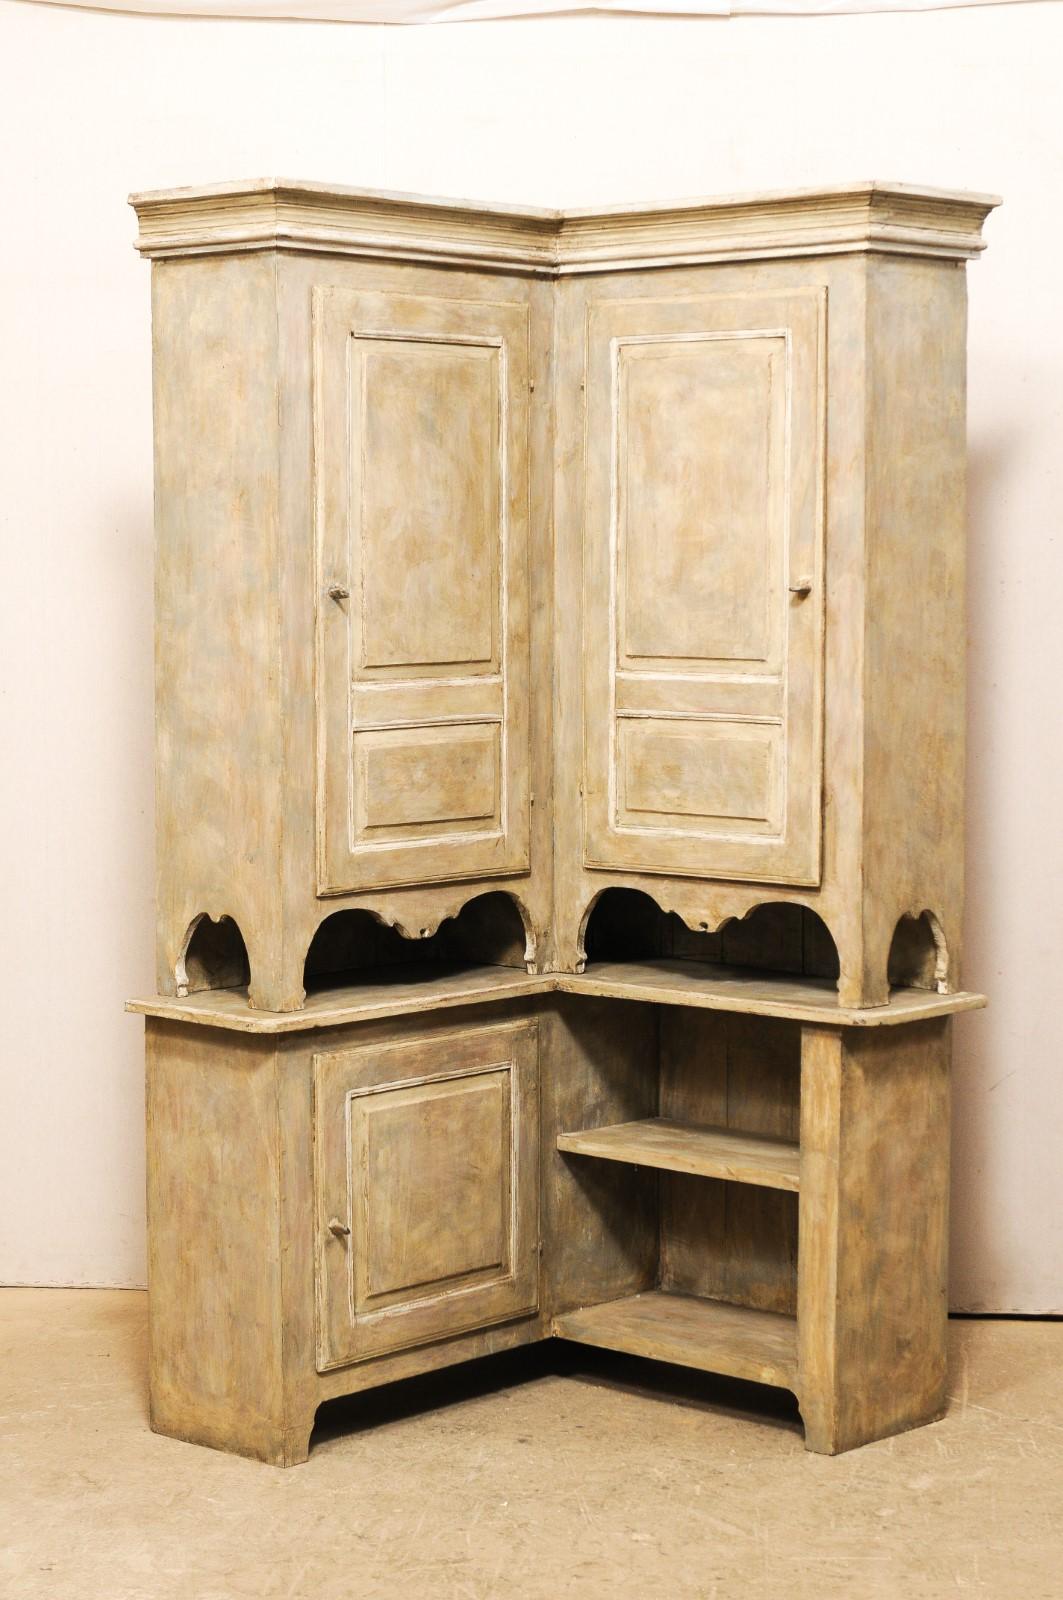 A Swedish Karl Johan period corner cabinet, circa 1850s. This mid-19th century cabinet from Sweden features a unique 90 degree angular design, taking advantage of corner space within a room. This upper case features a nicely molded cornice, has two